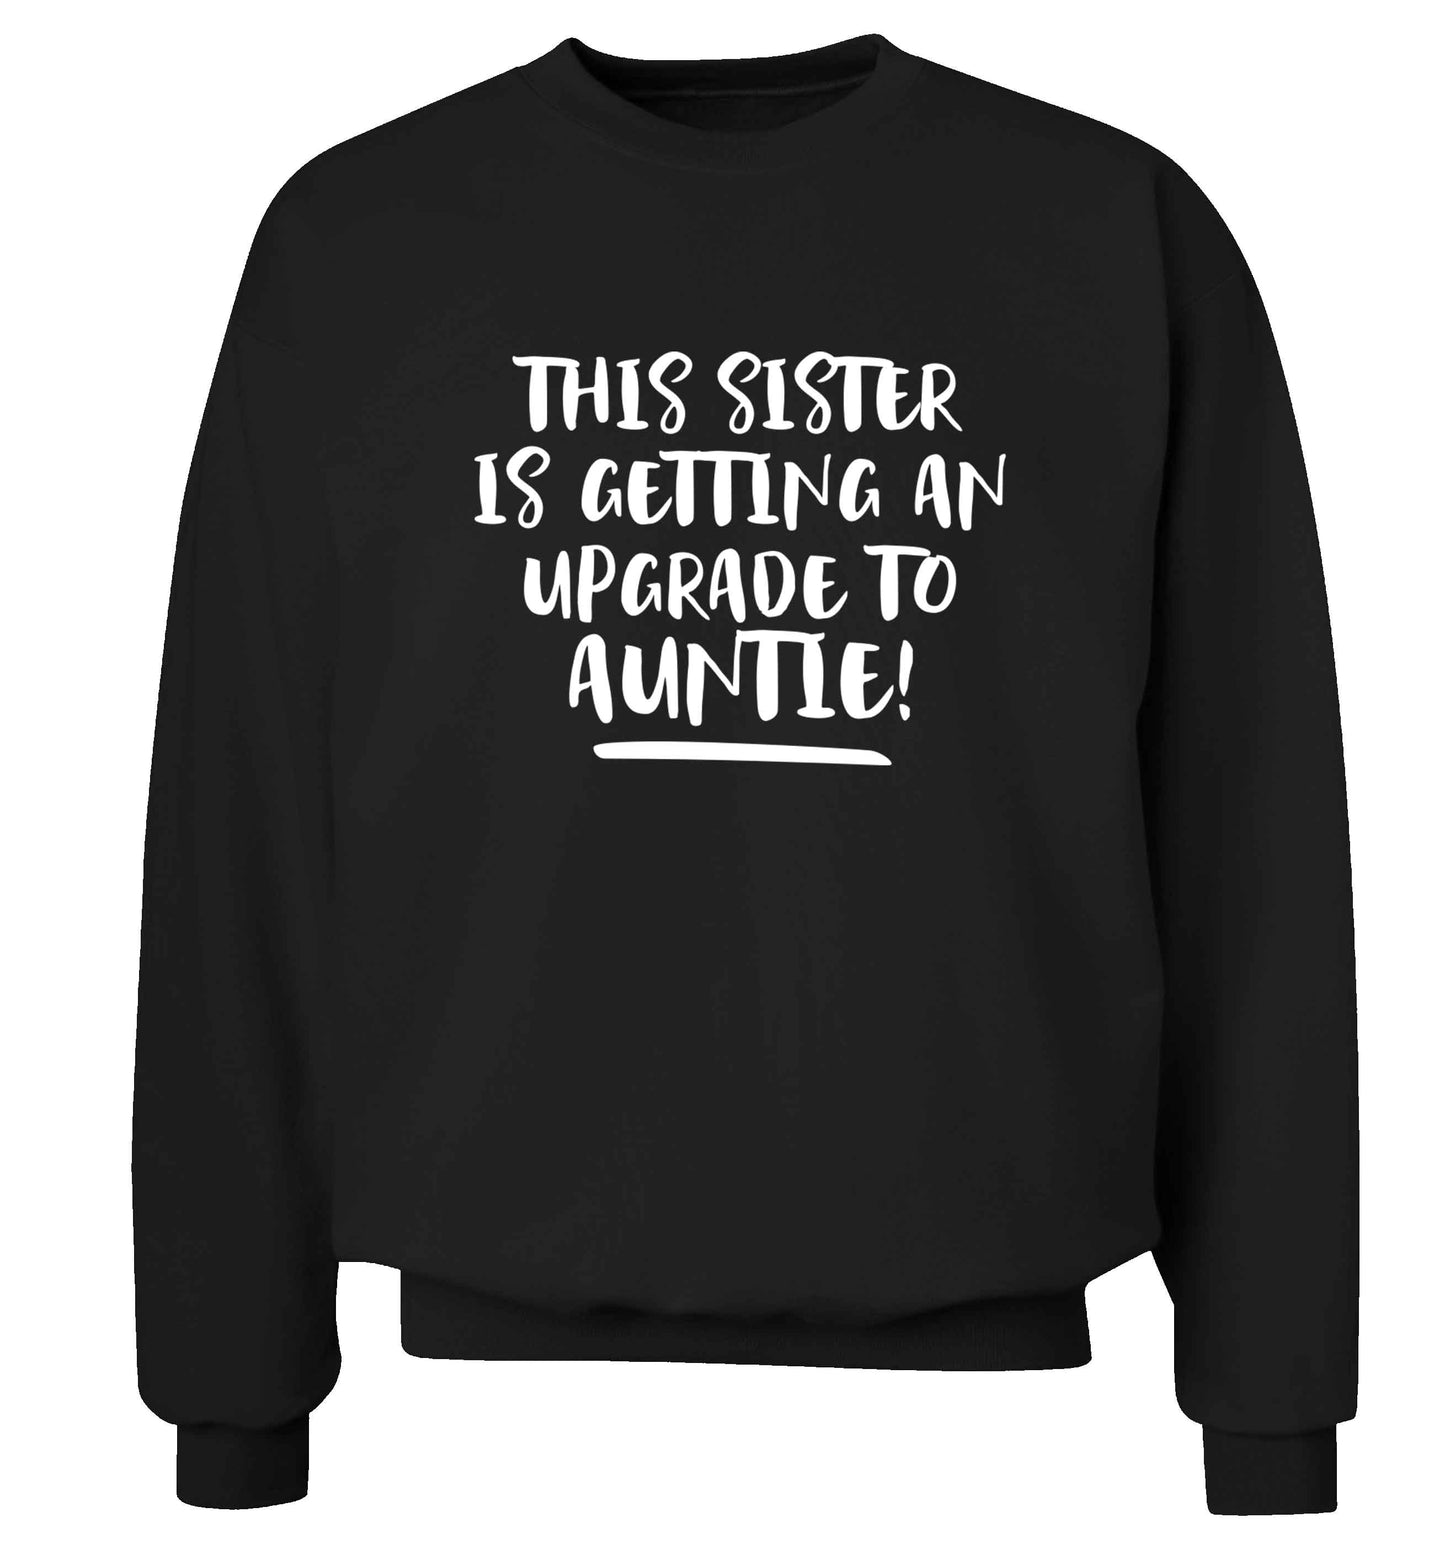 This sister is getting an upgrade to auntie! Adult's unisex black Sweater 2XL